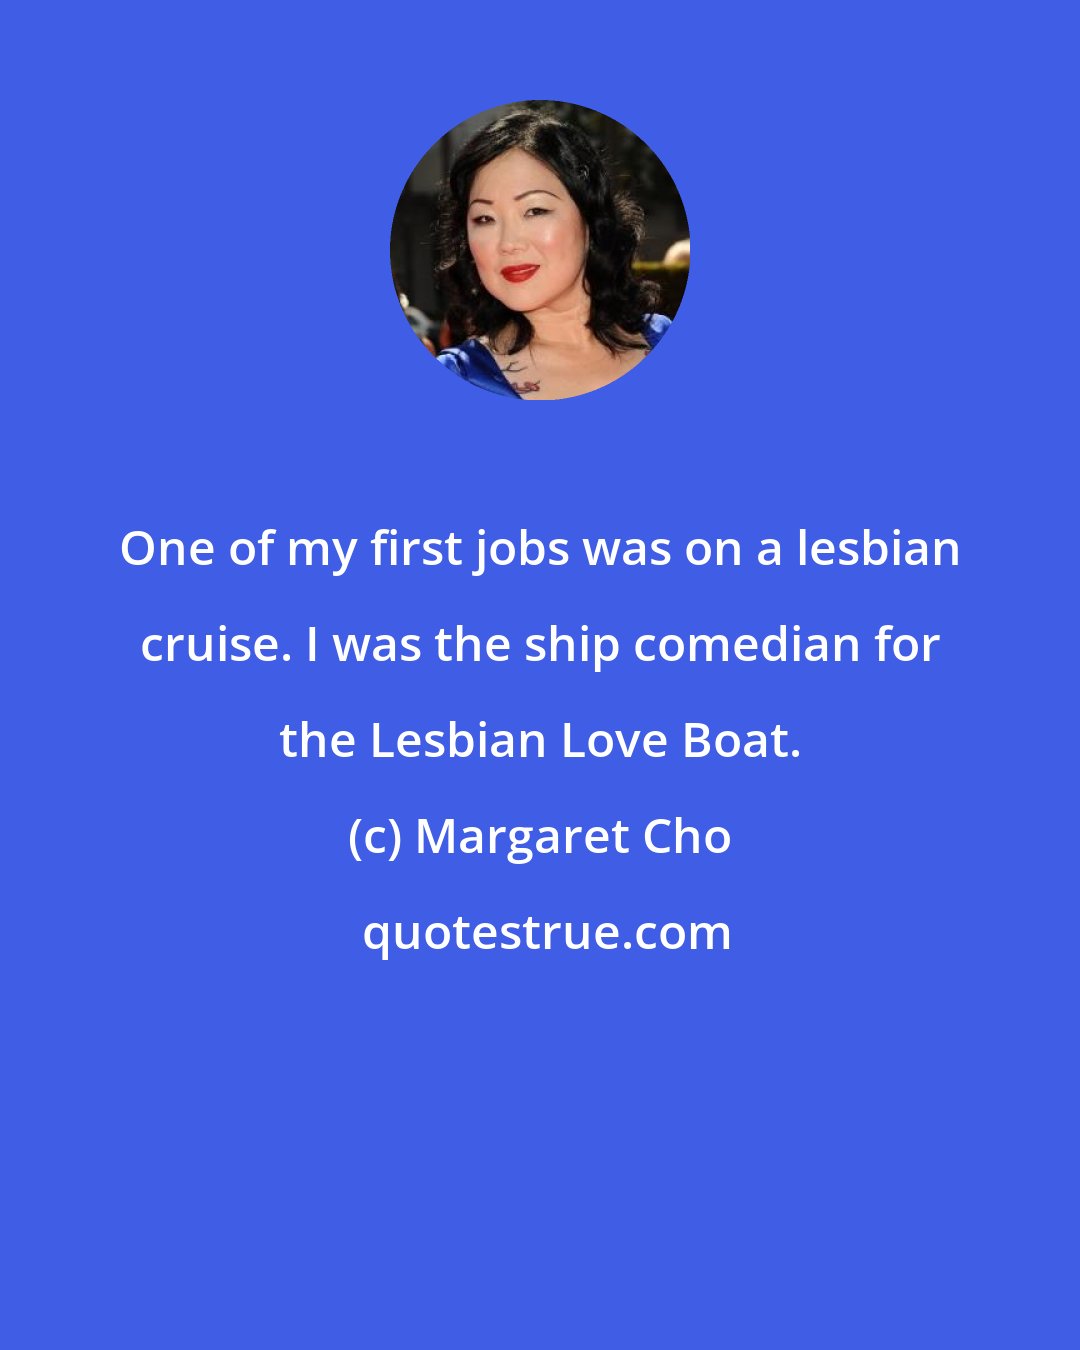 Margaret Cho: One of my first jobs was on a lesbian cruise. I was the ship comedian for the Lesbian Love Boat.